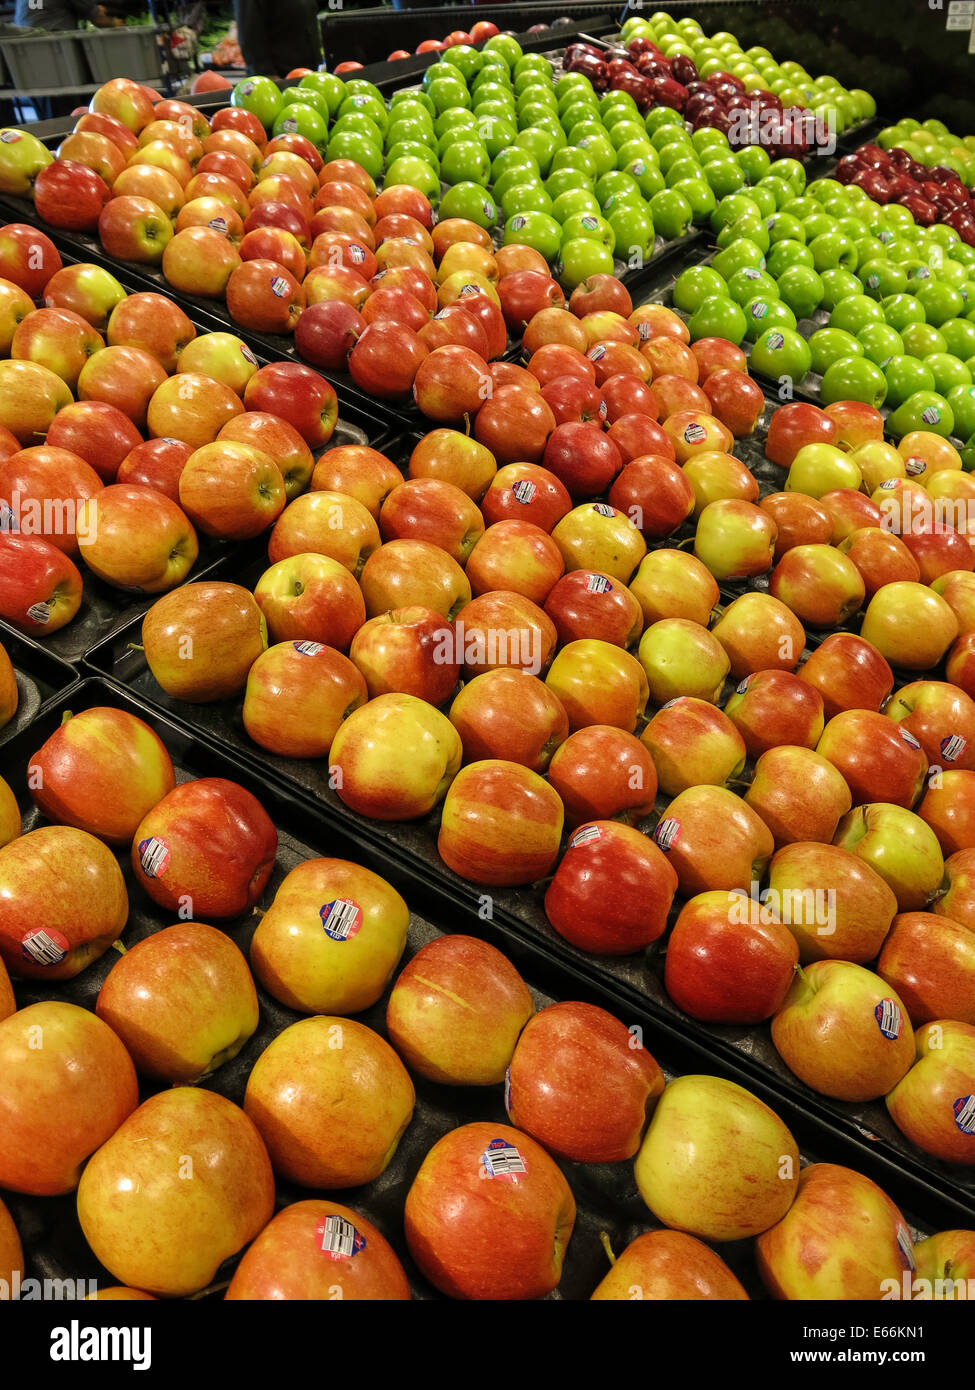 https://c8.alamy.com/comp/E66KN1/apples-in-produce-section-smiths-food-and-drug-store-in-great-falls-E66KN1.jpg